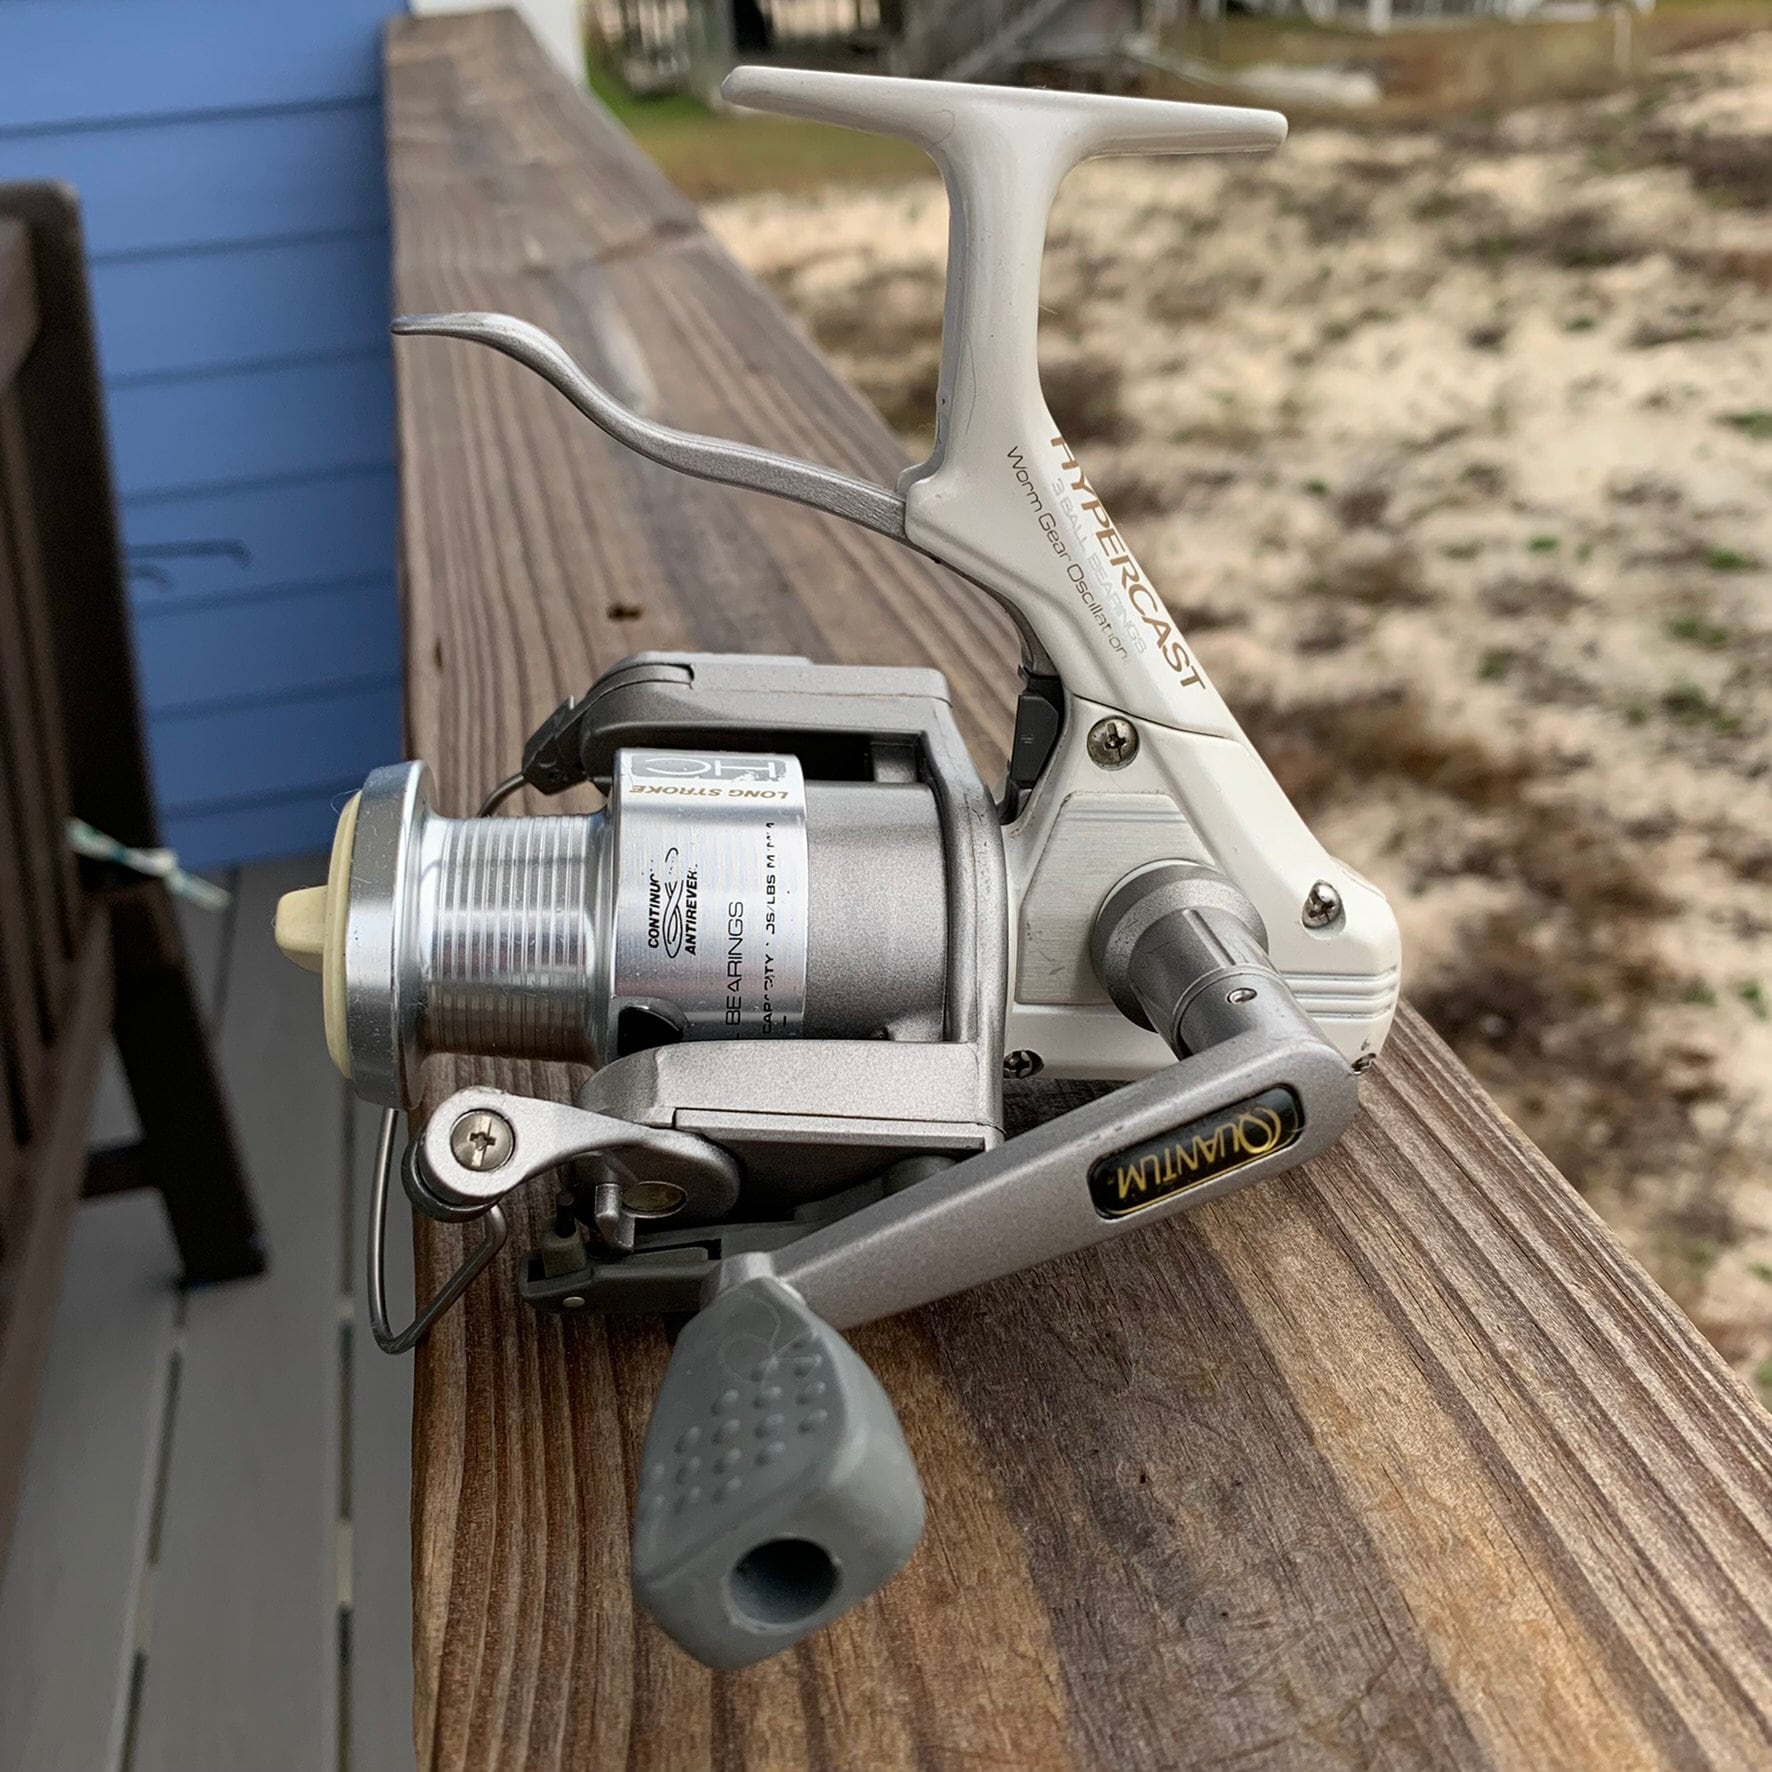 quantum spinning reel hypercast USED long stroke works perfect hc2 xl w/bag